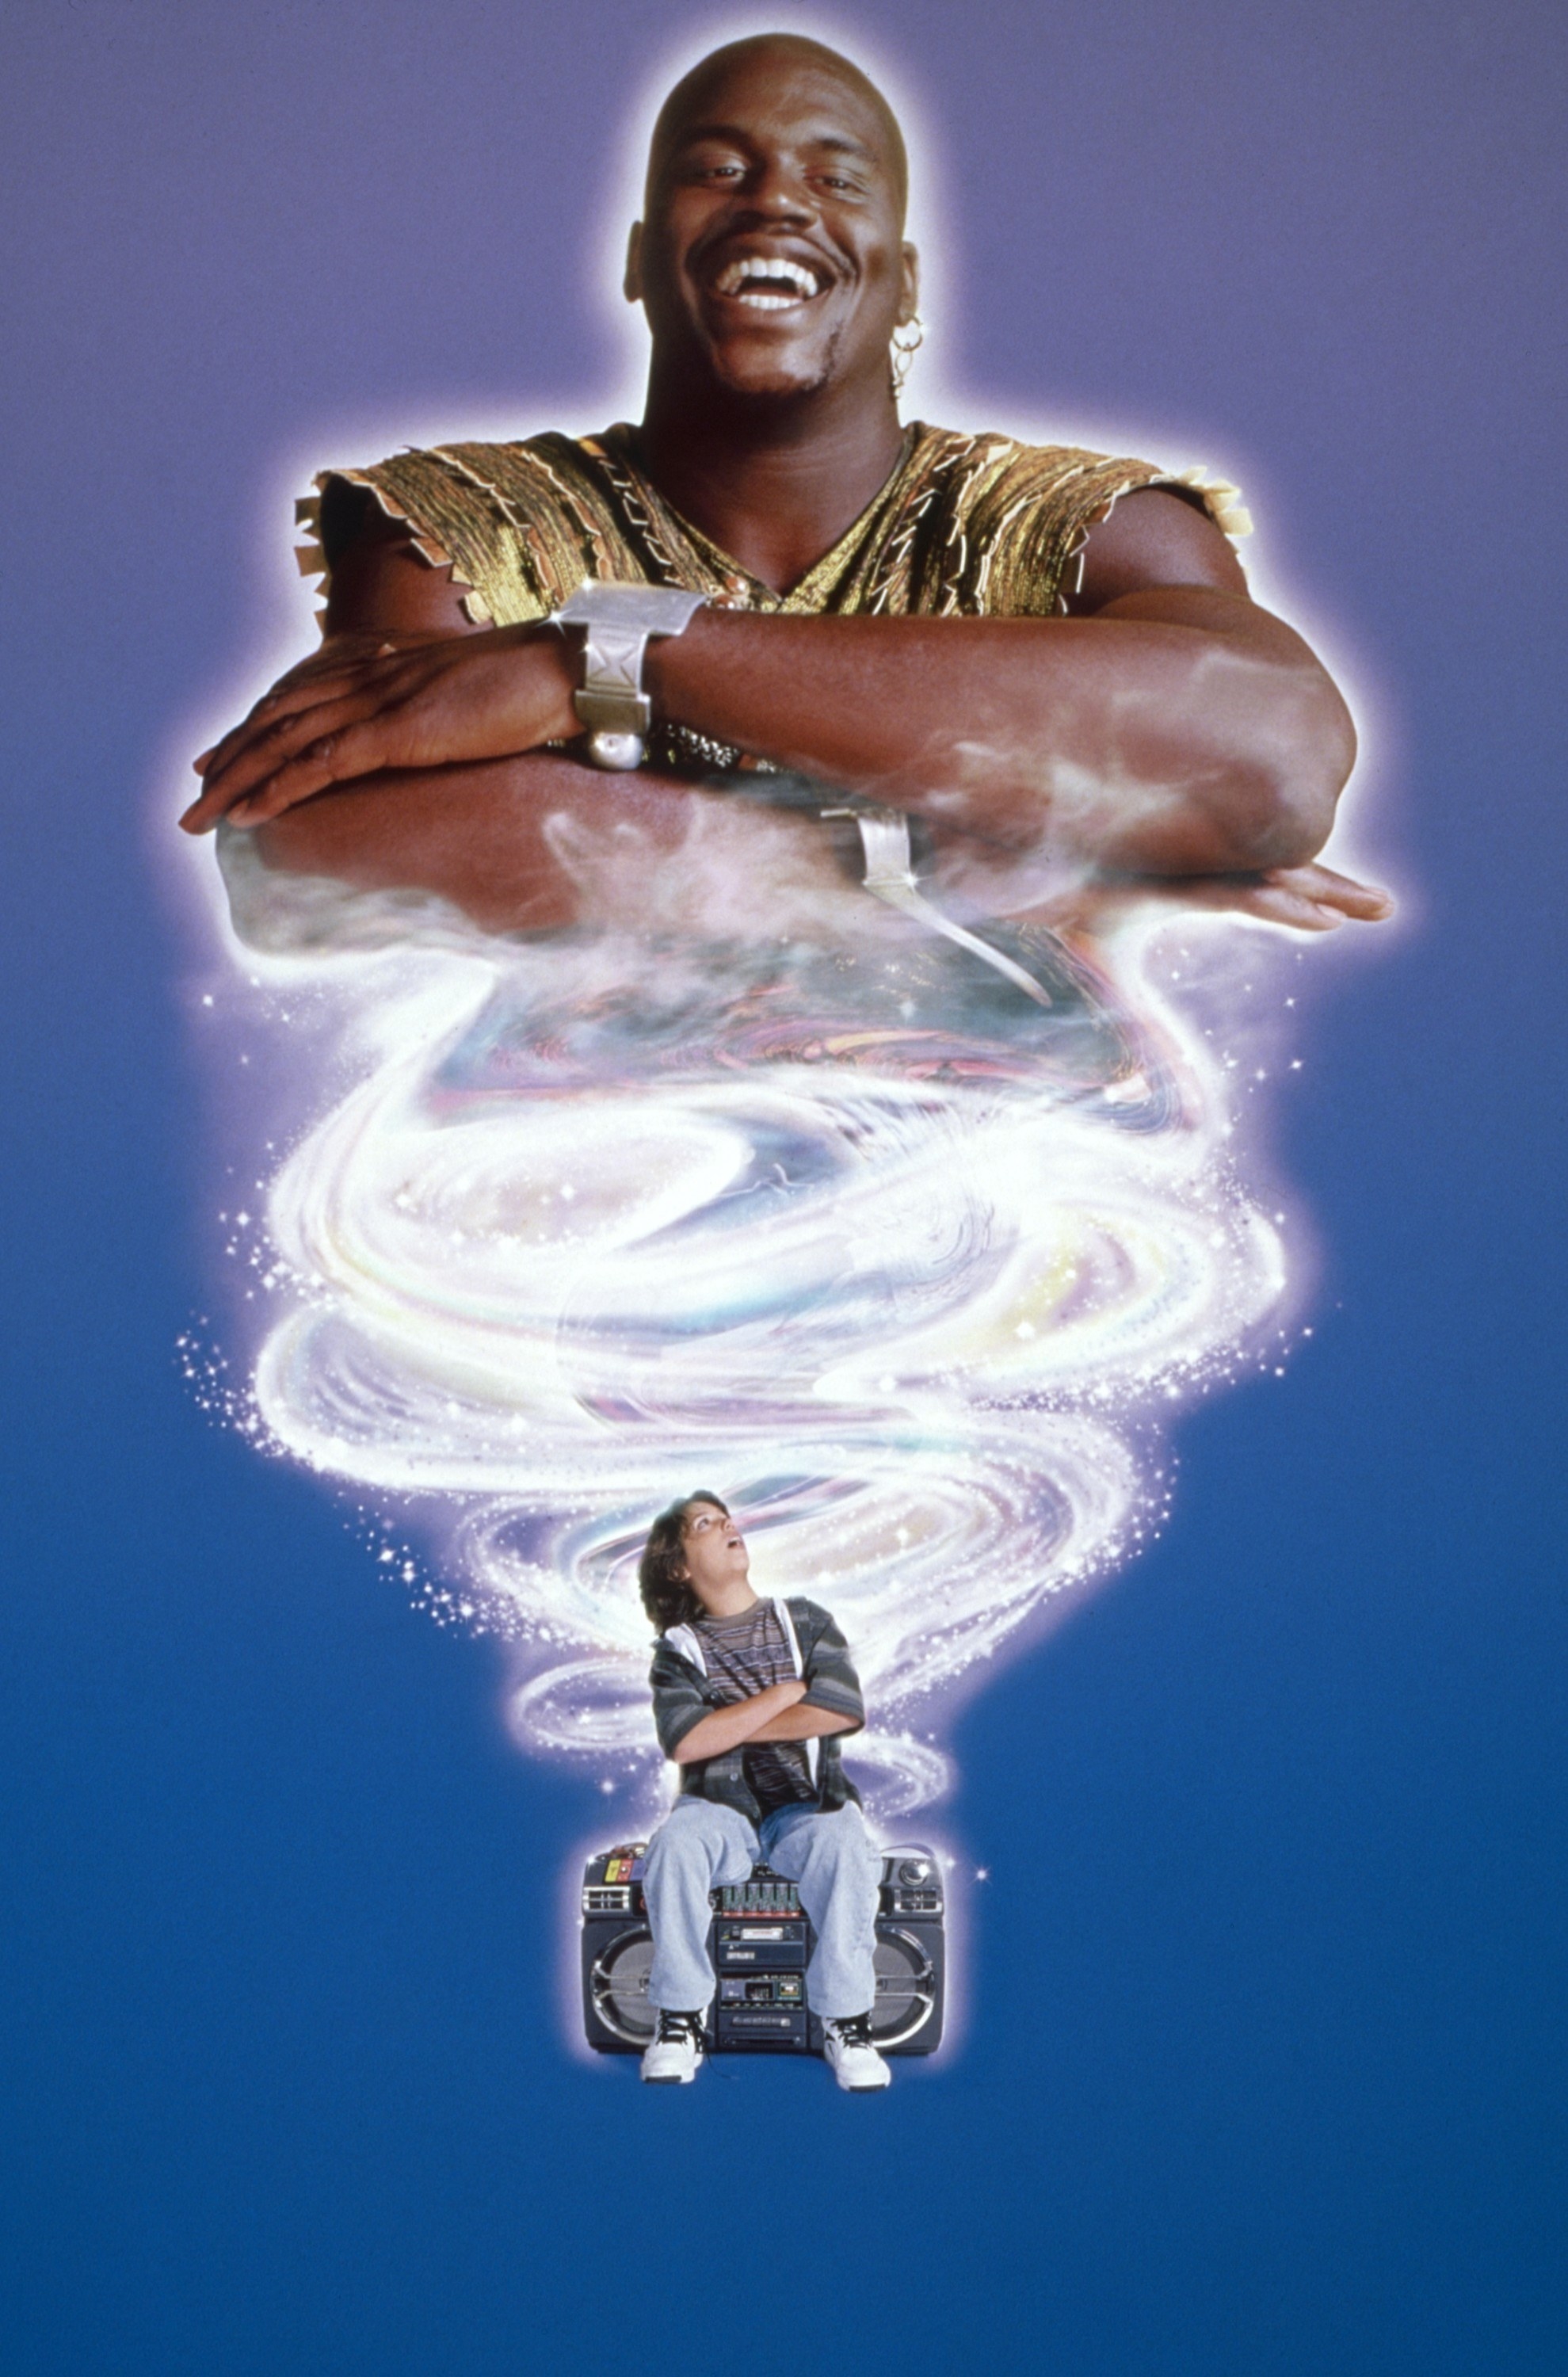 Shaq as a genie as a child looks up in awe at him